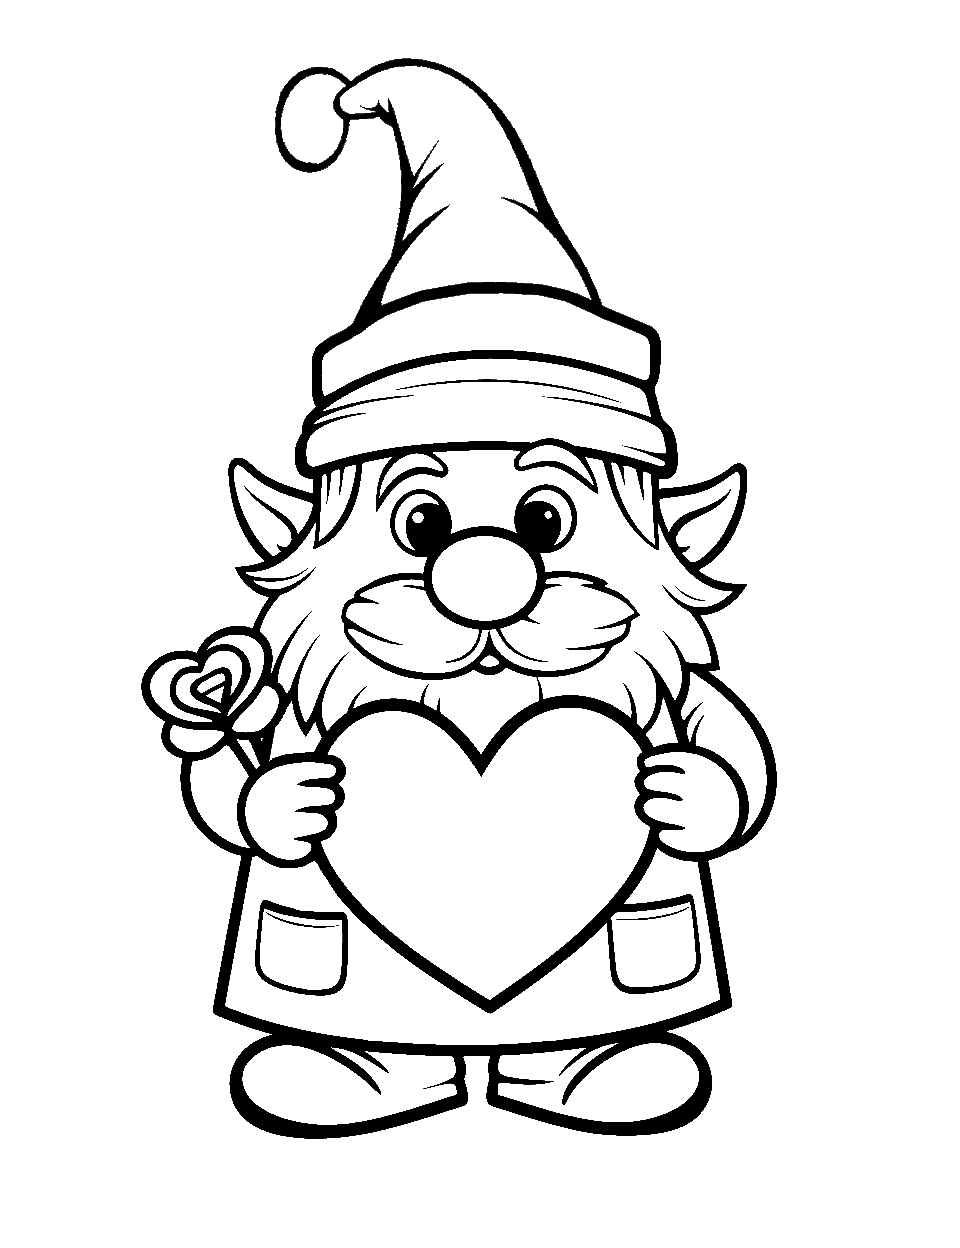 Gnome Holding a Heart Coloring Page - A cute gnome with a big valentine heart in his hands.